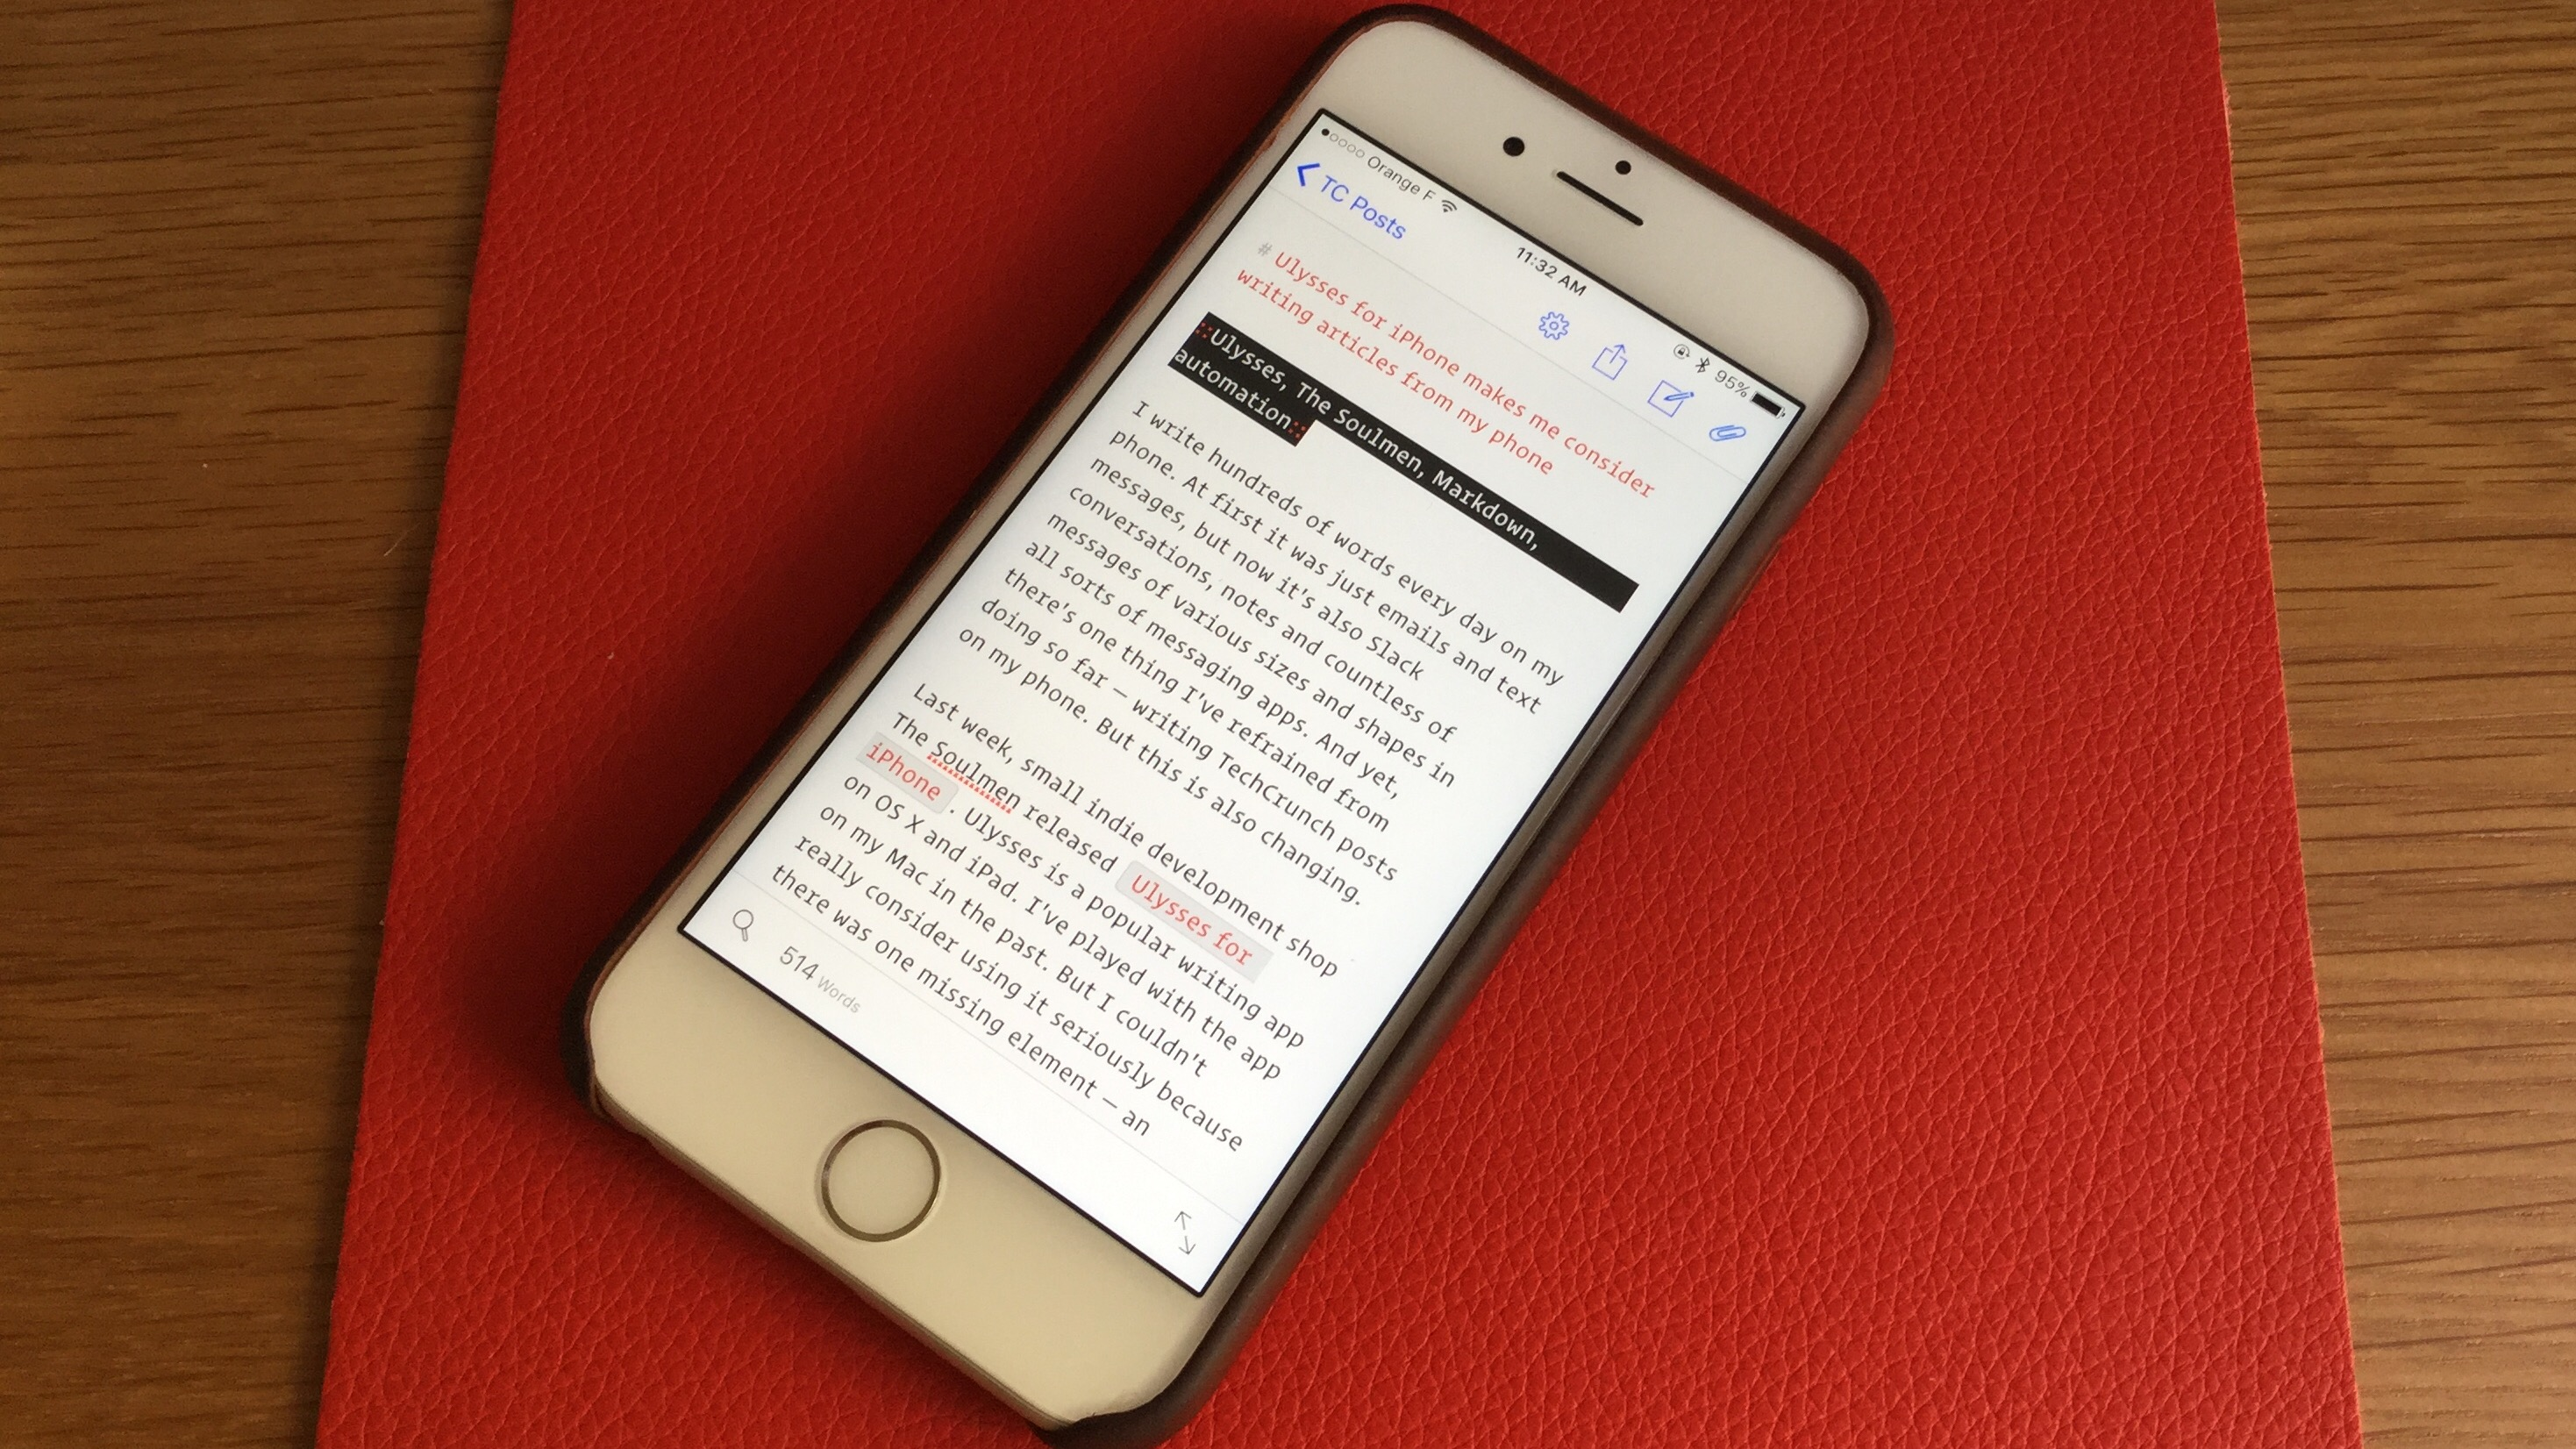 Ulysses is now a damn good WordPress editor for Mac and iOS